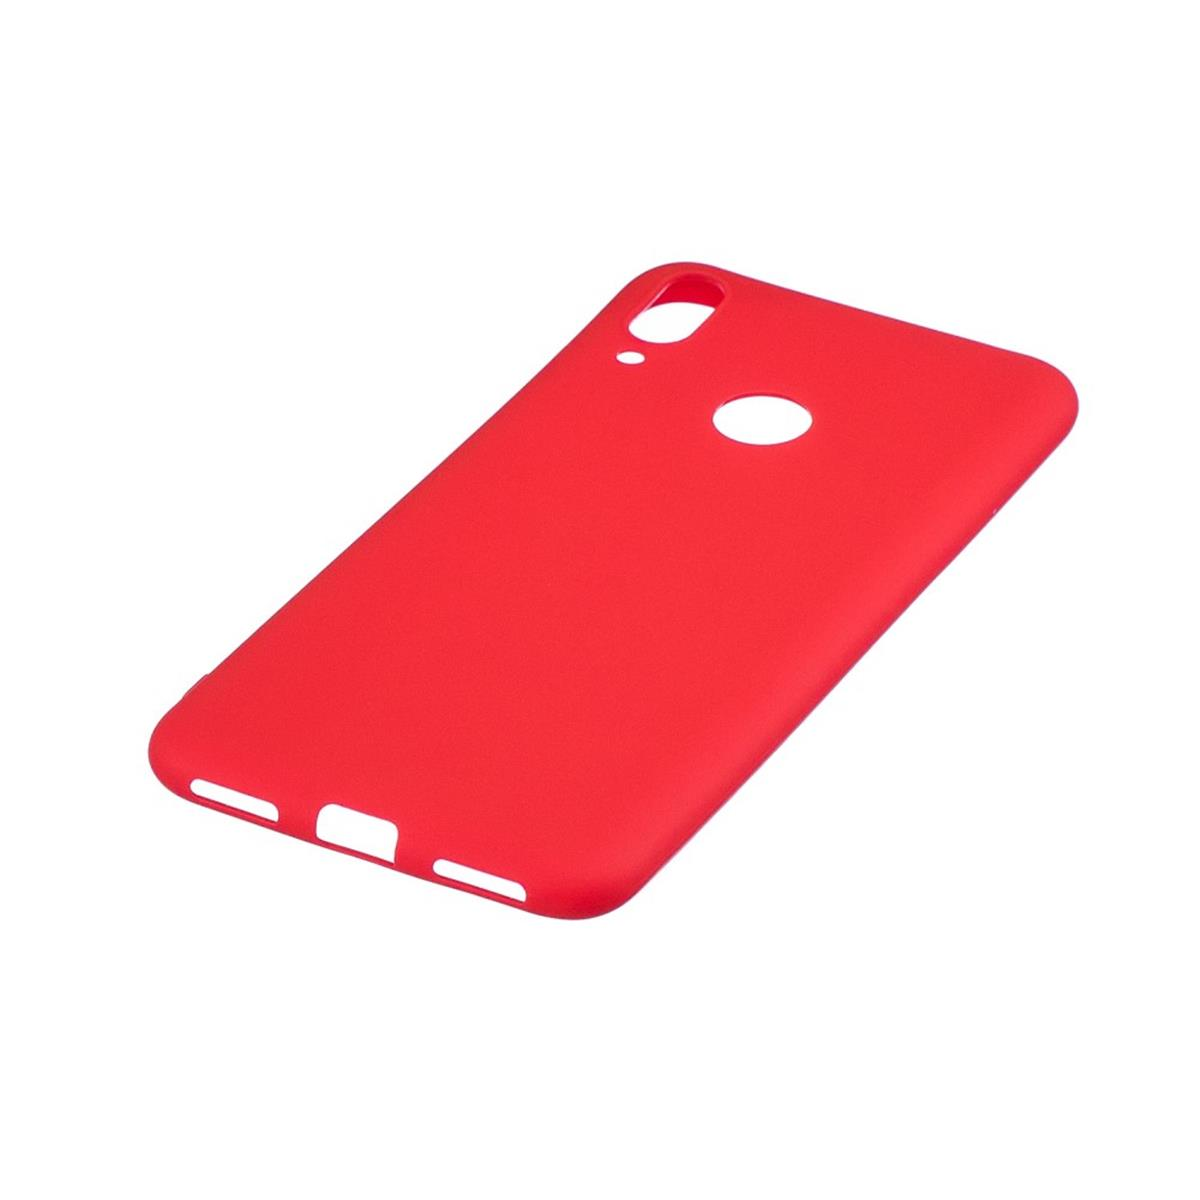 (2019), Rot Huawei, aus Y7 Backcover, COVERKINGZ Silikon, Handycase